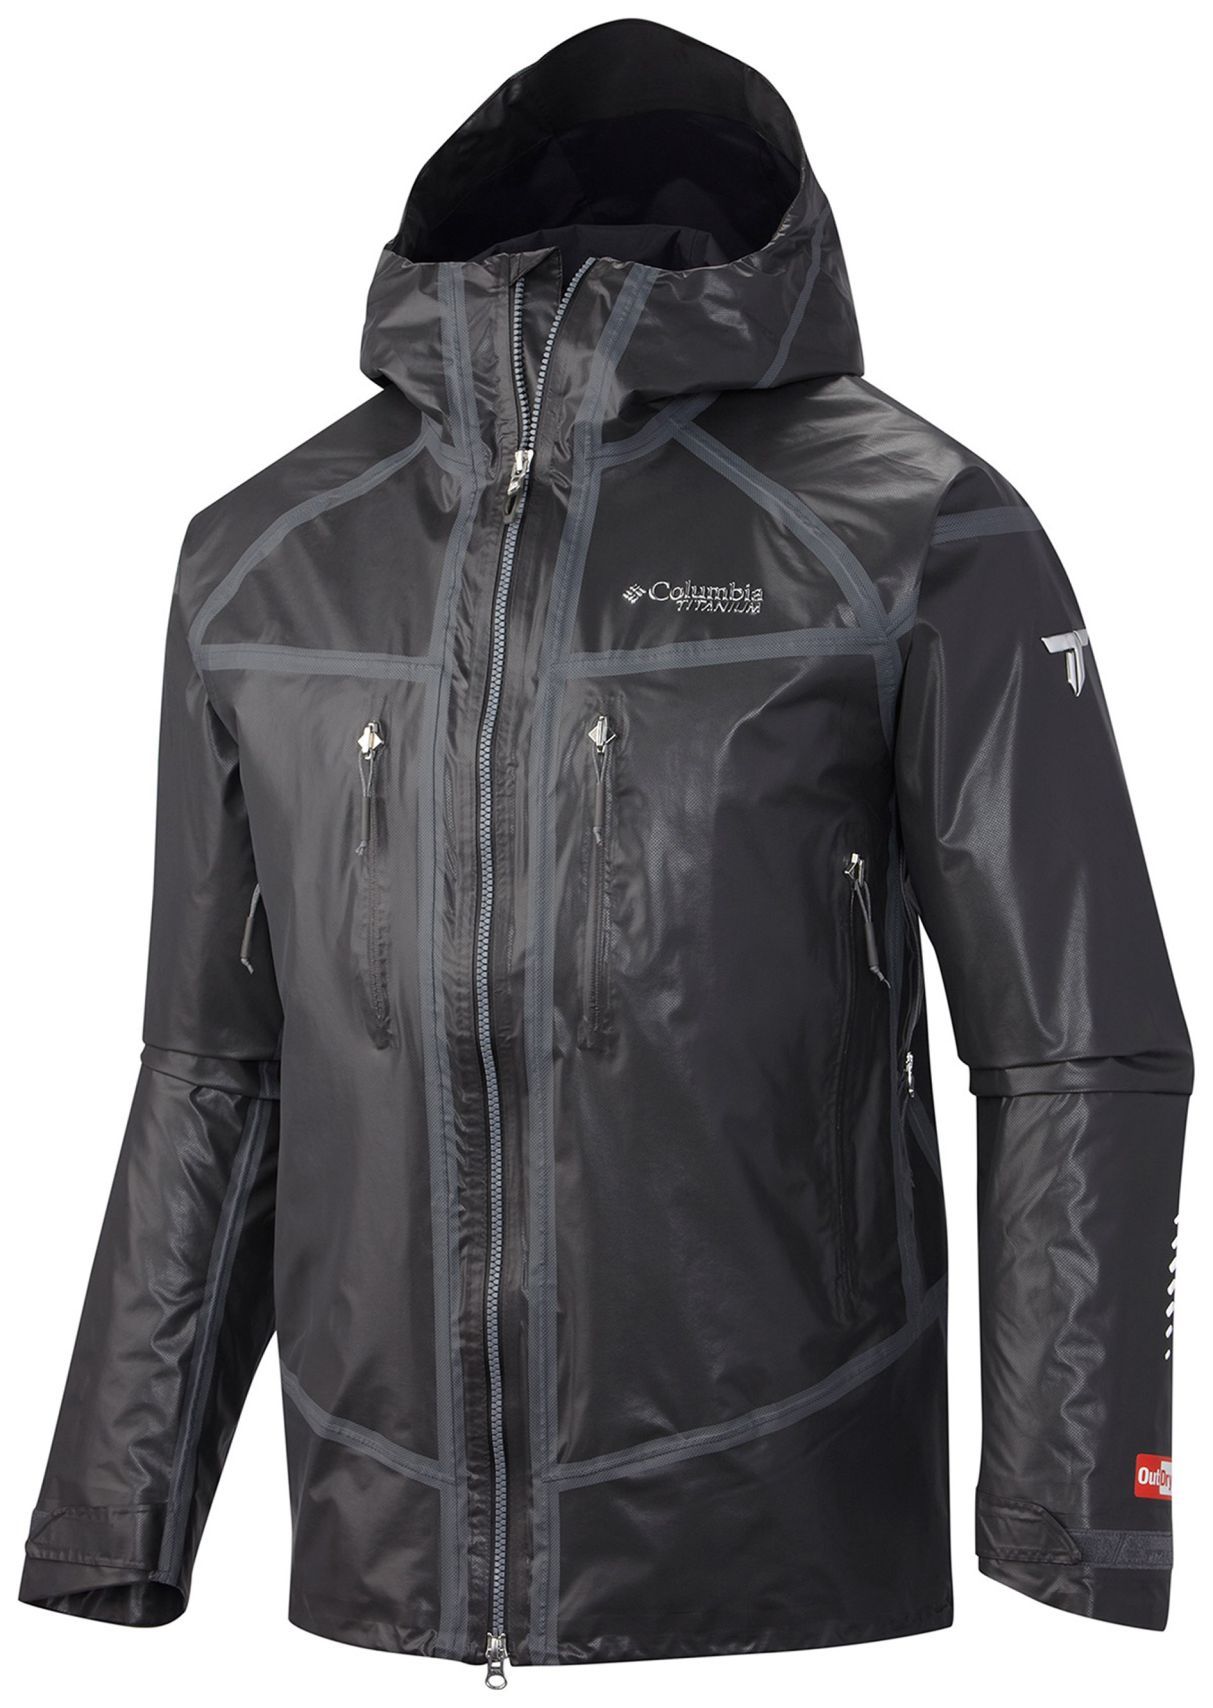 columbia outdry extreme